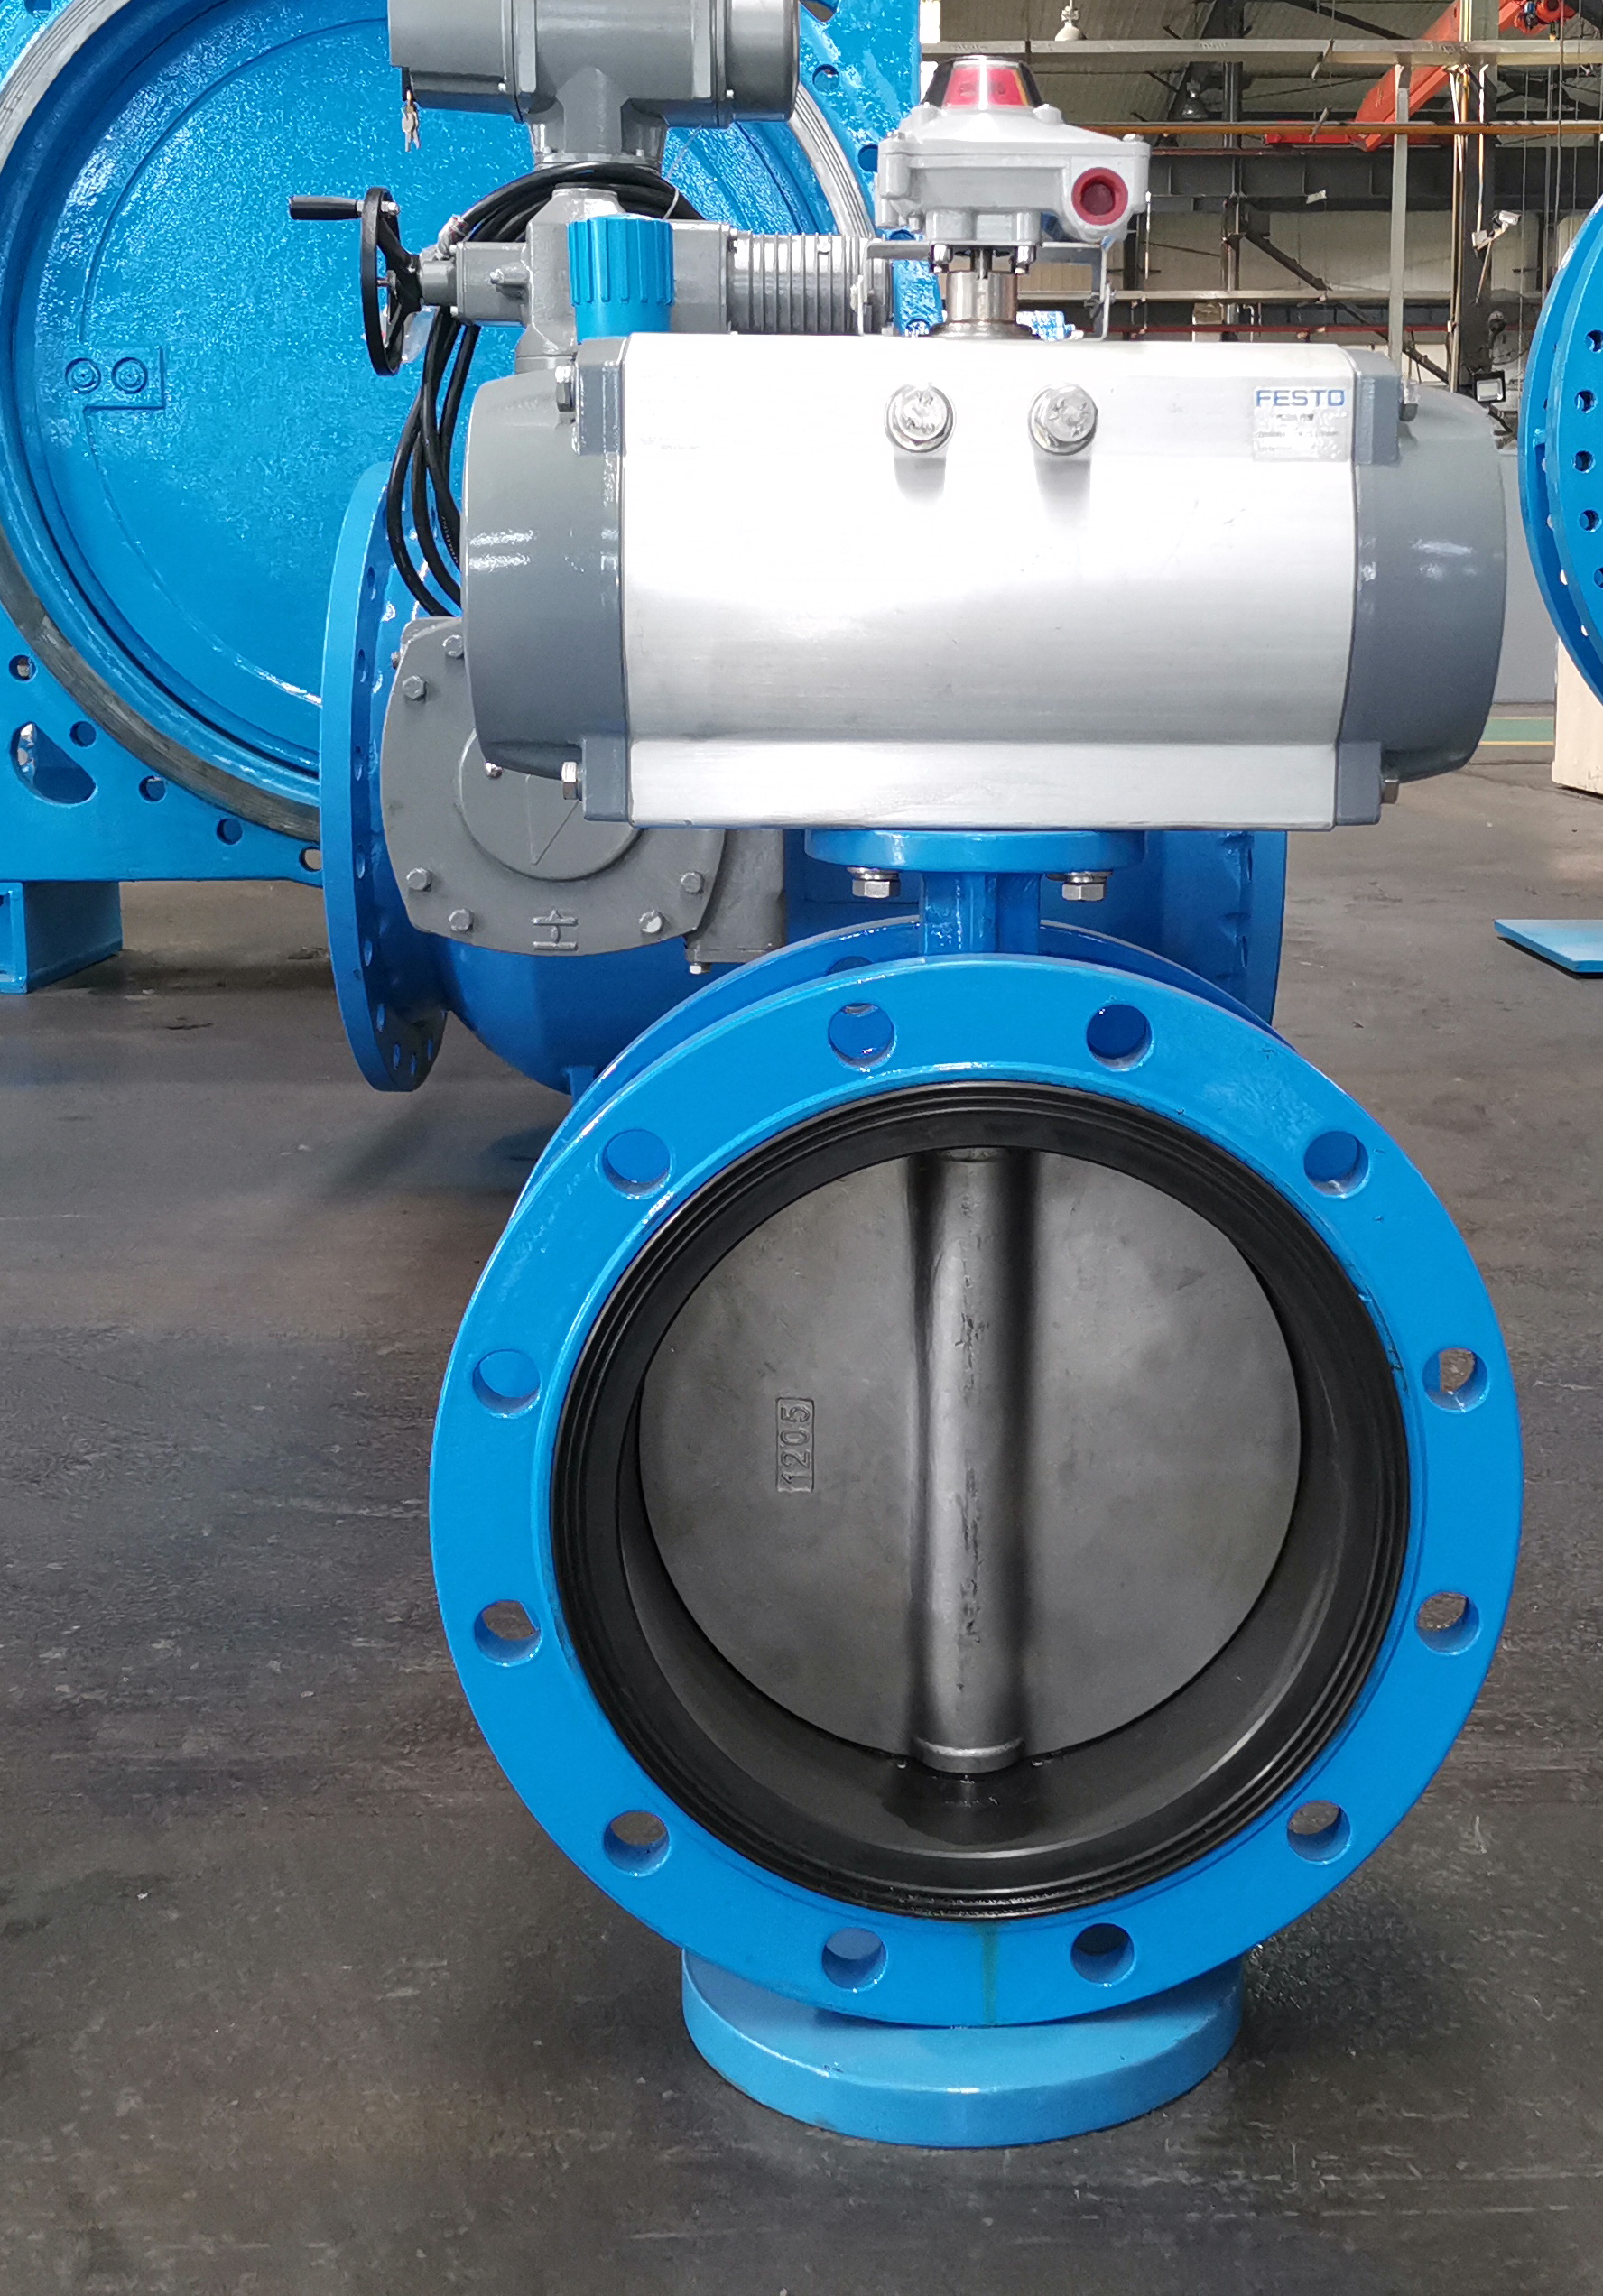 electric pneumatic butterfly valves